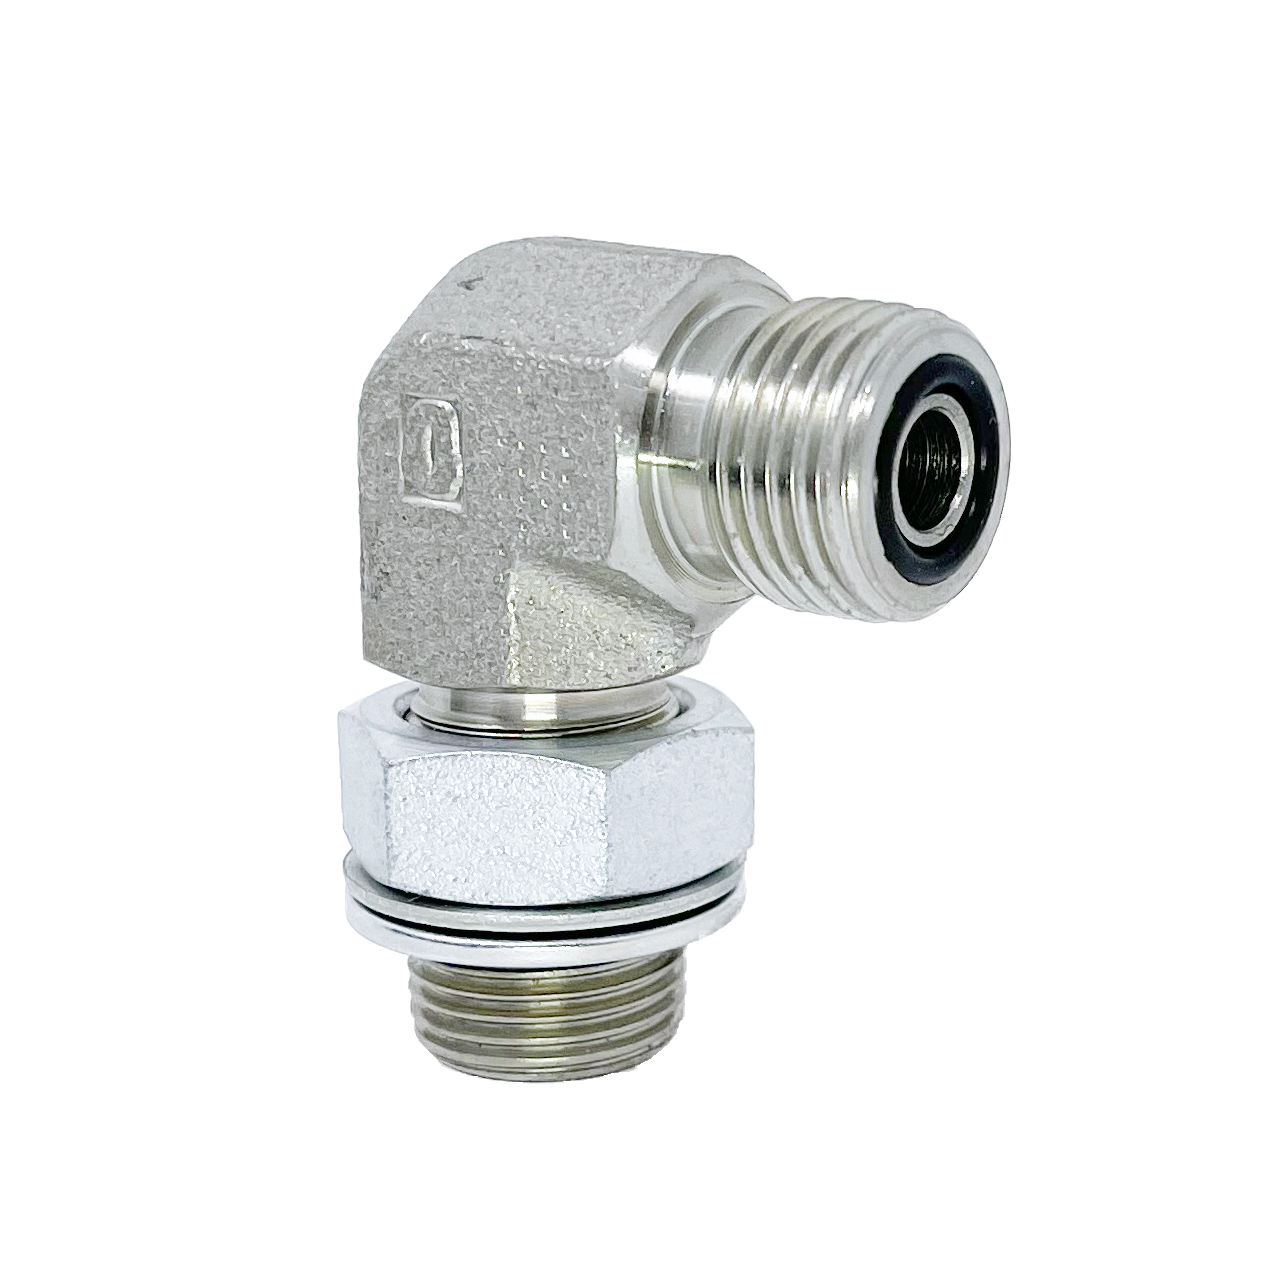 6059-04-04 : Adaptall 90-Degree  Adapter, Male 0.25 (1/4") ORFS x Male 0.25 (1/4") BSPP, Carbon Steel